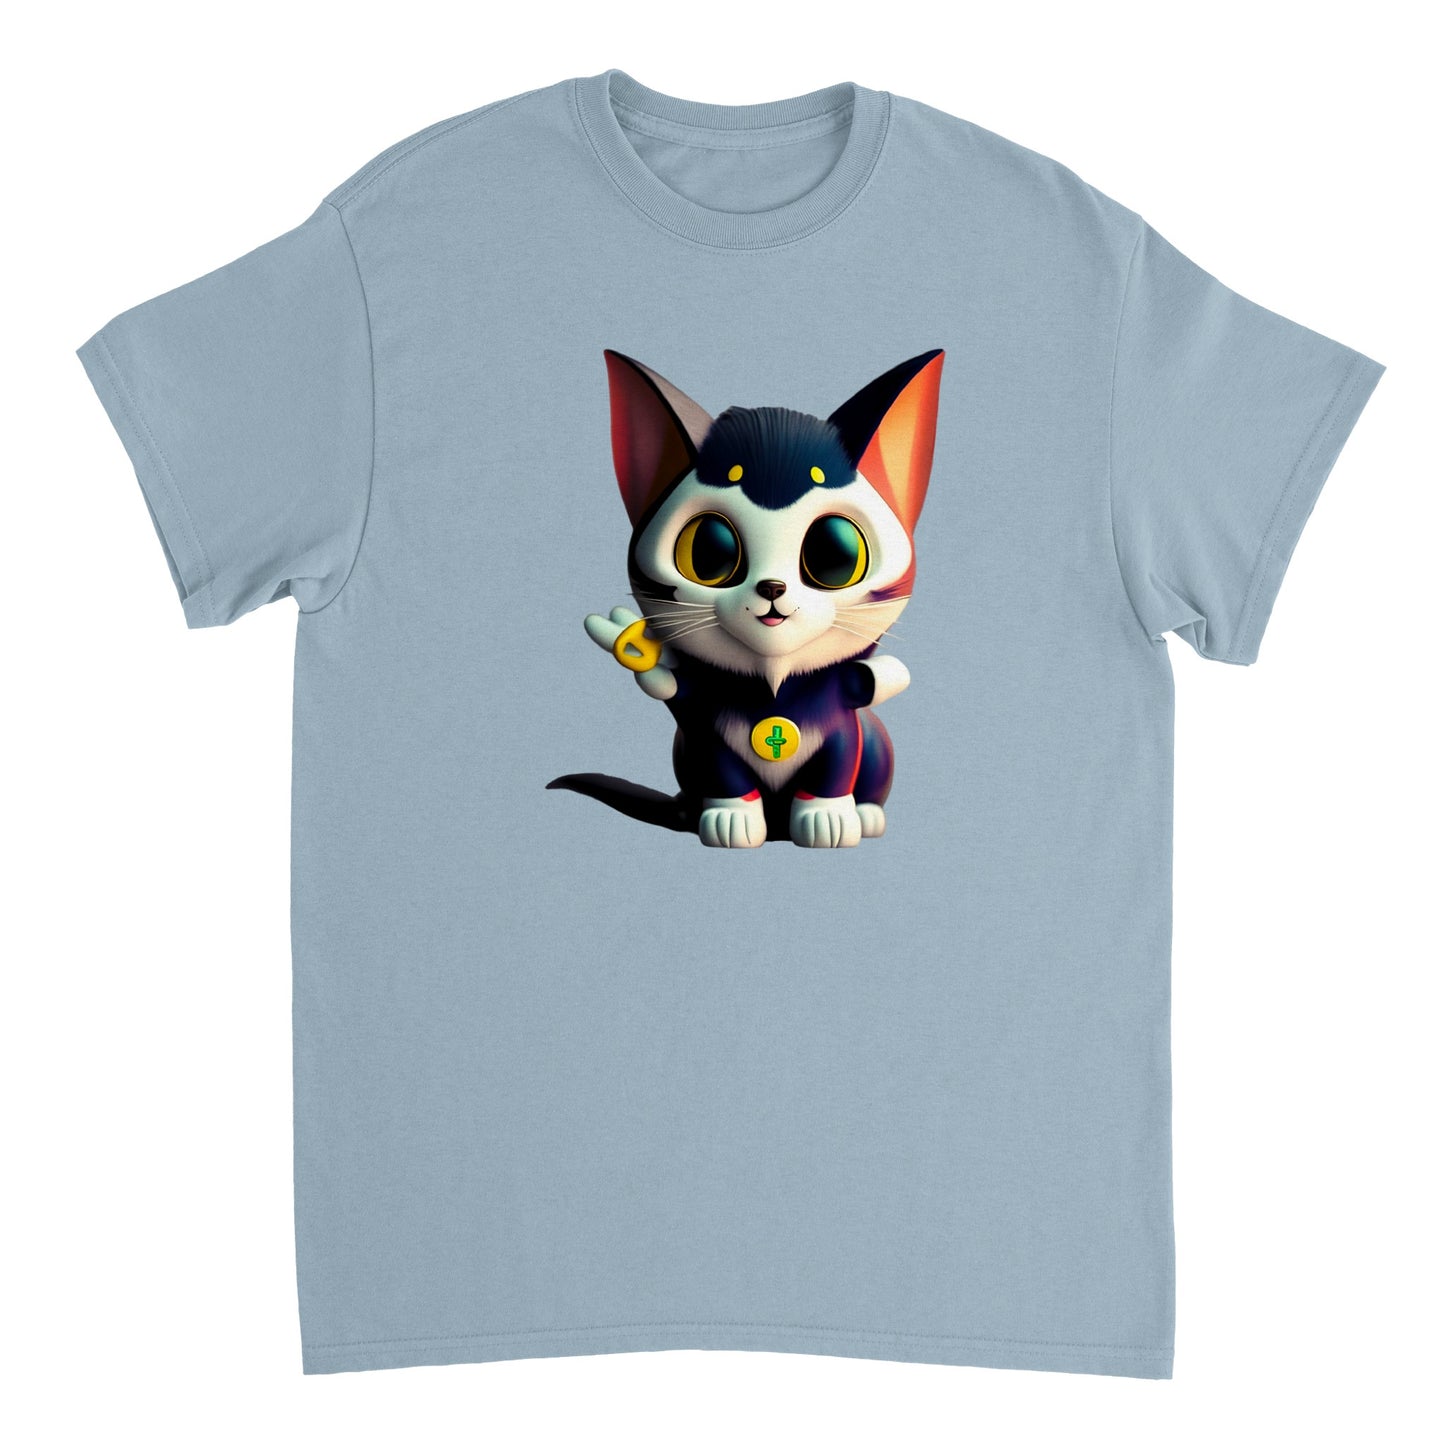 Adorable, Cool, Cute Cats and Kittens Toy - Heavyweight Unisex Crewneck T-shirt 56